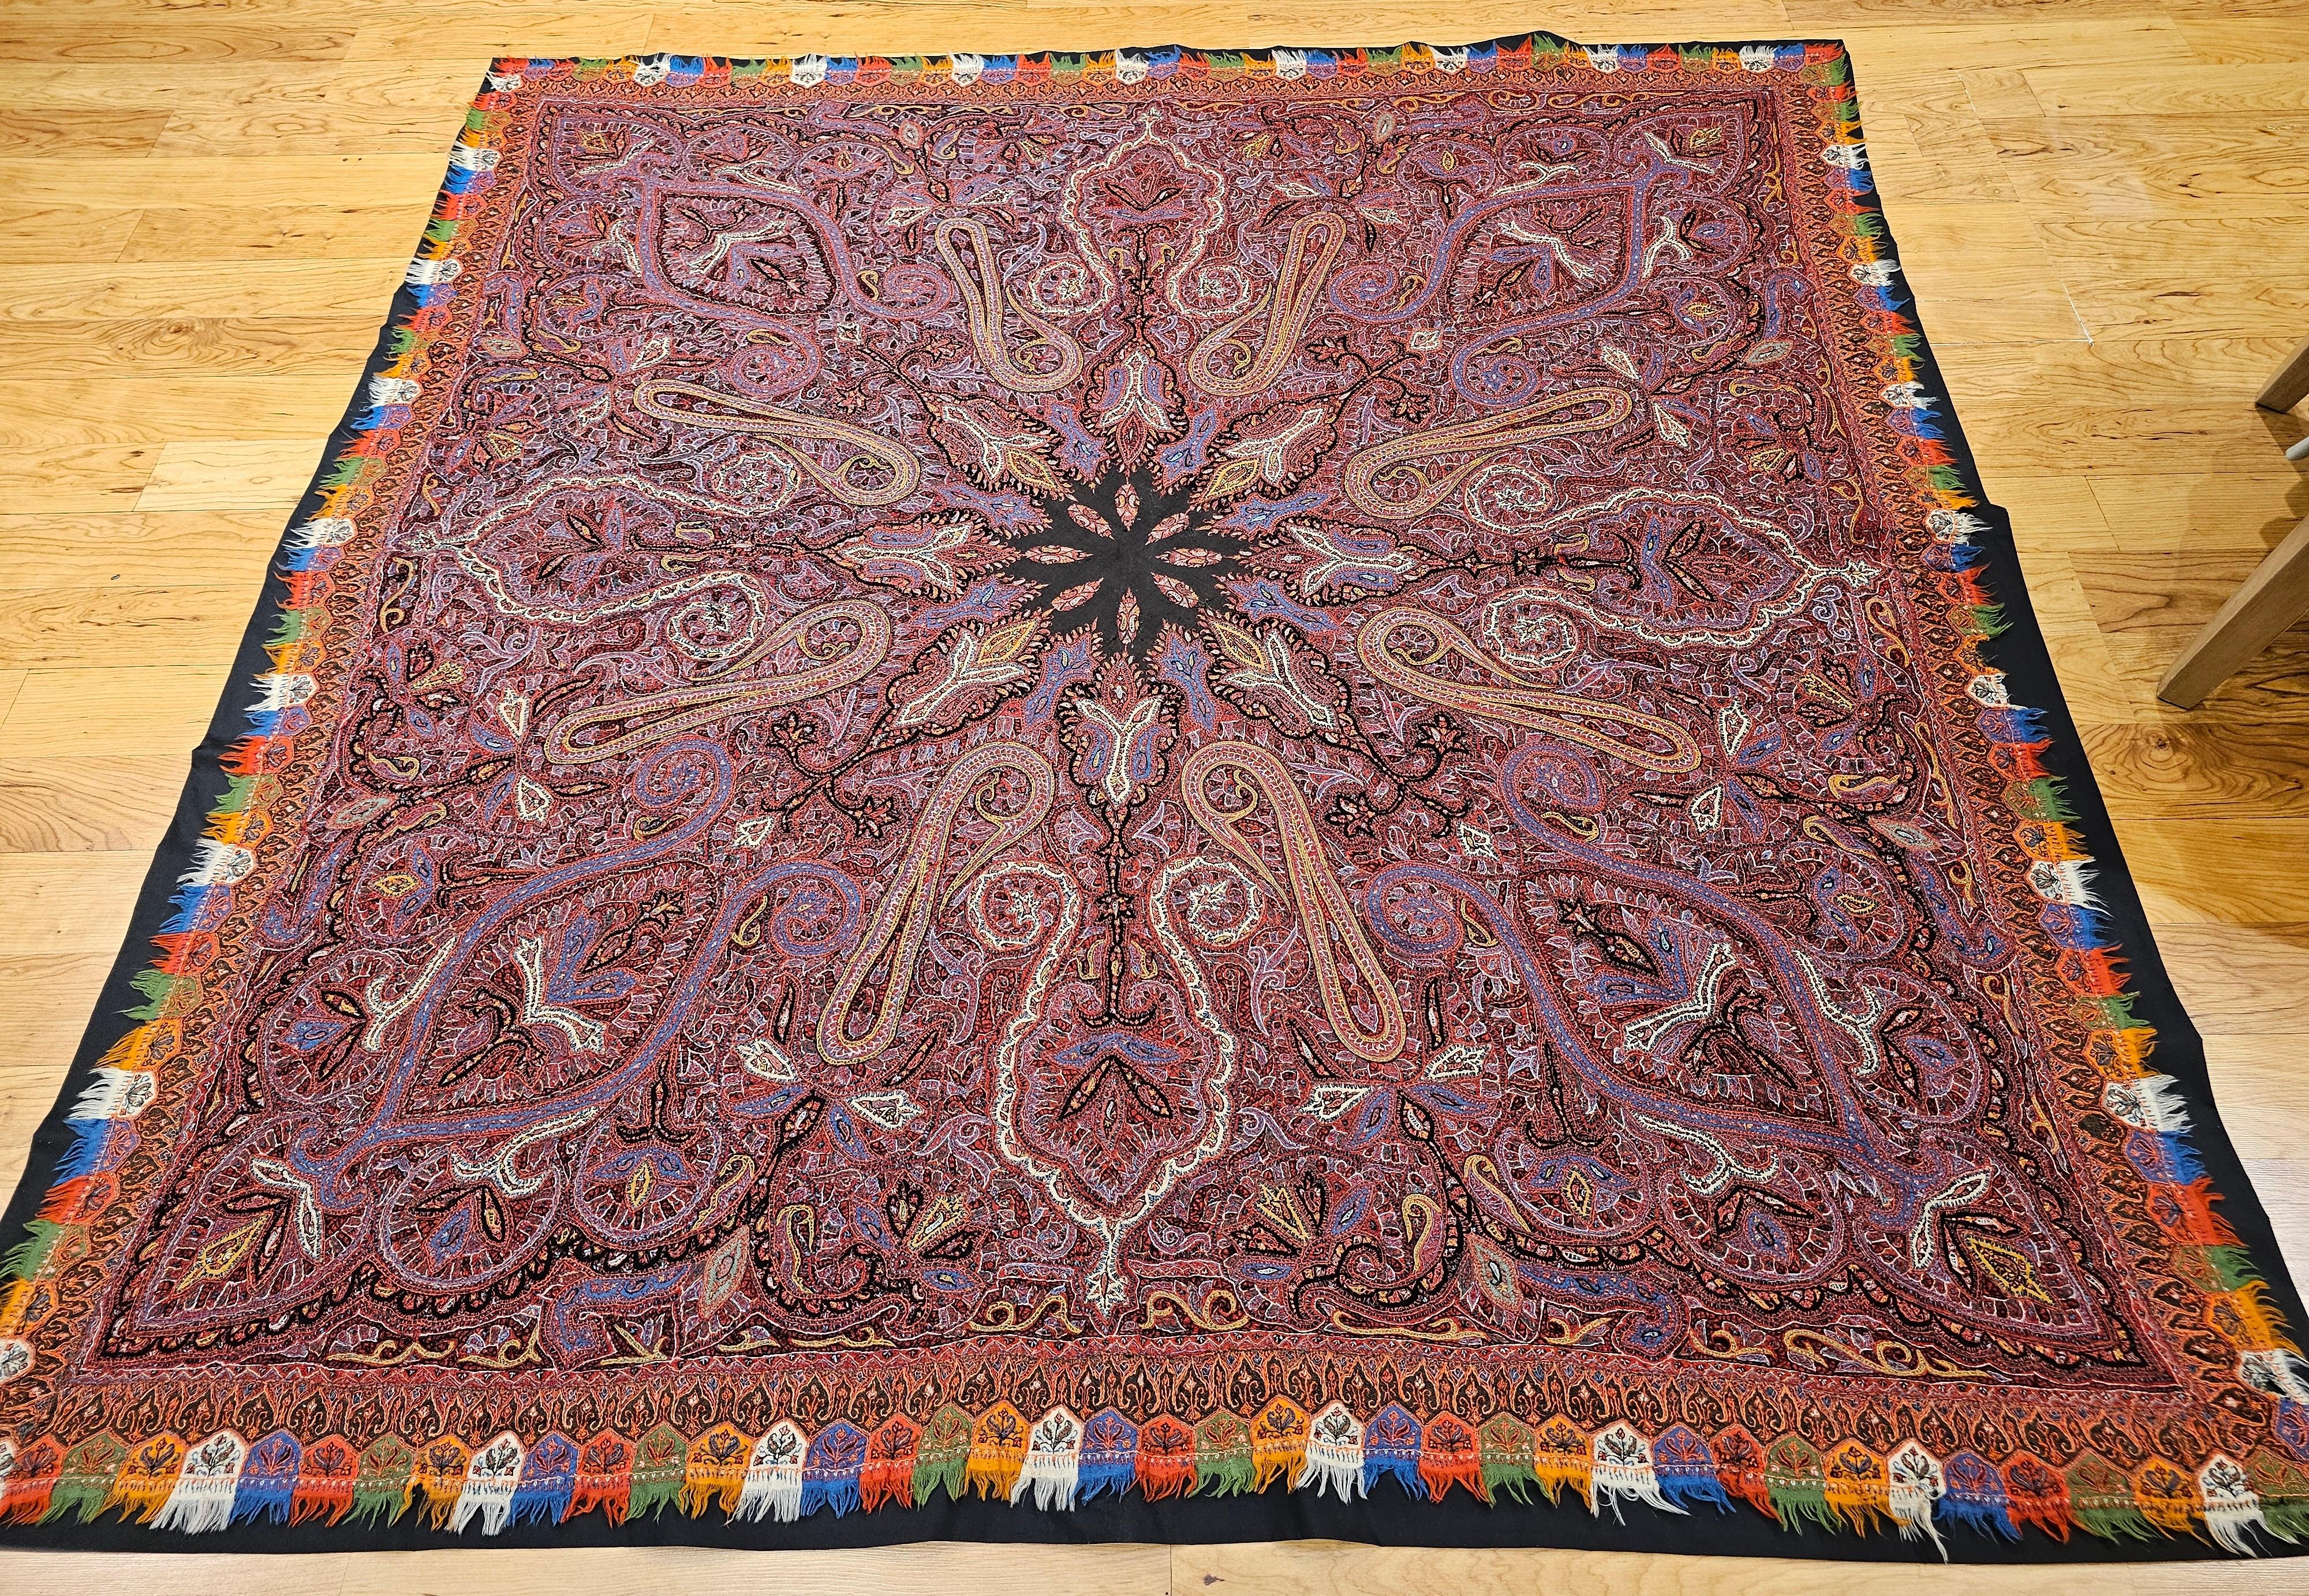 19th Century Hand Embroidered “Kashmiri Pieced Shawl” in Brick Red, Black, Blue For Sale 7